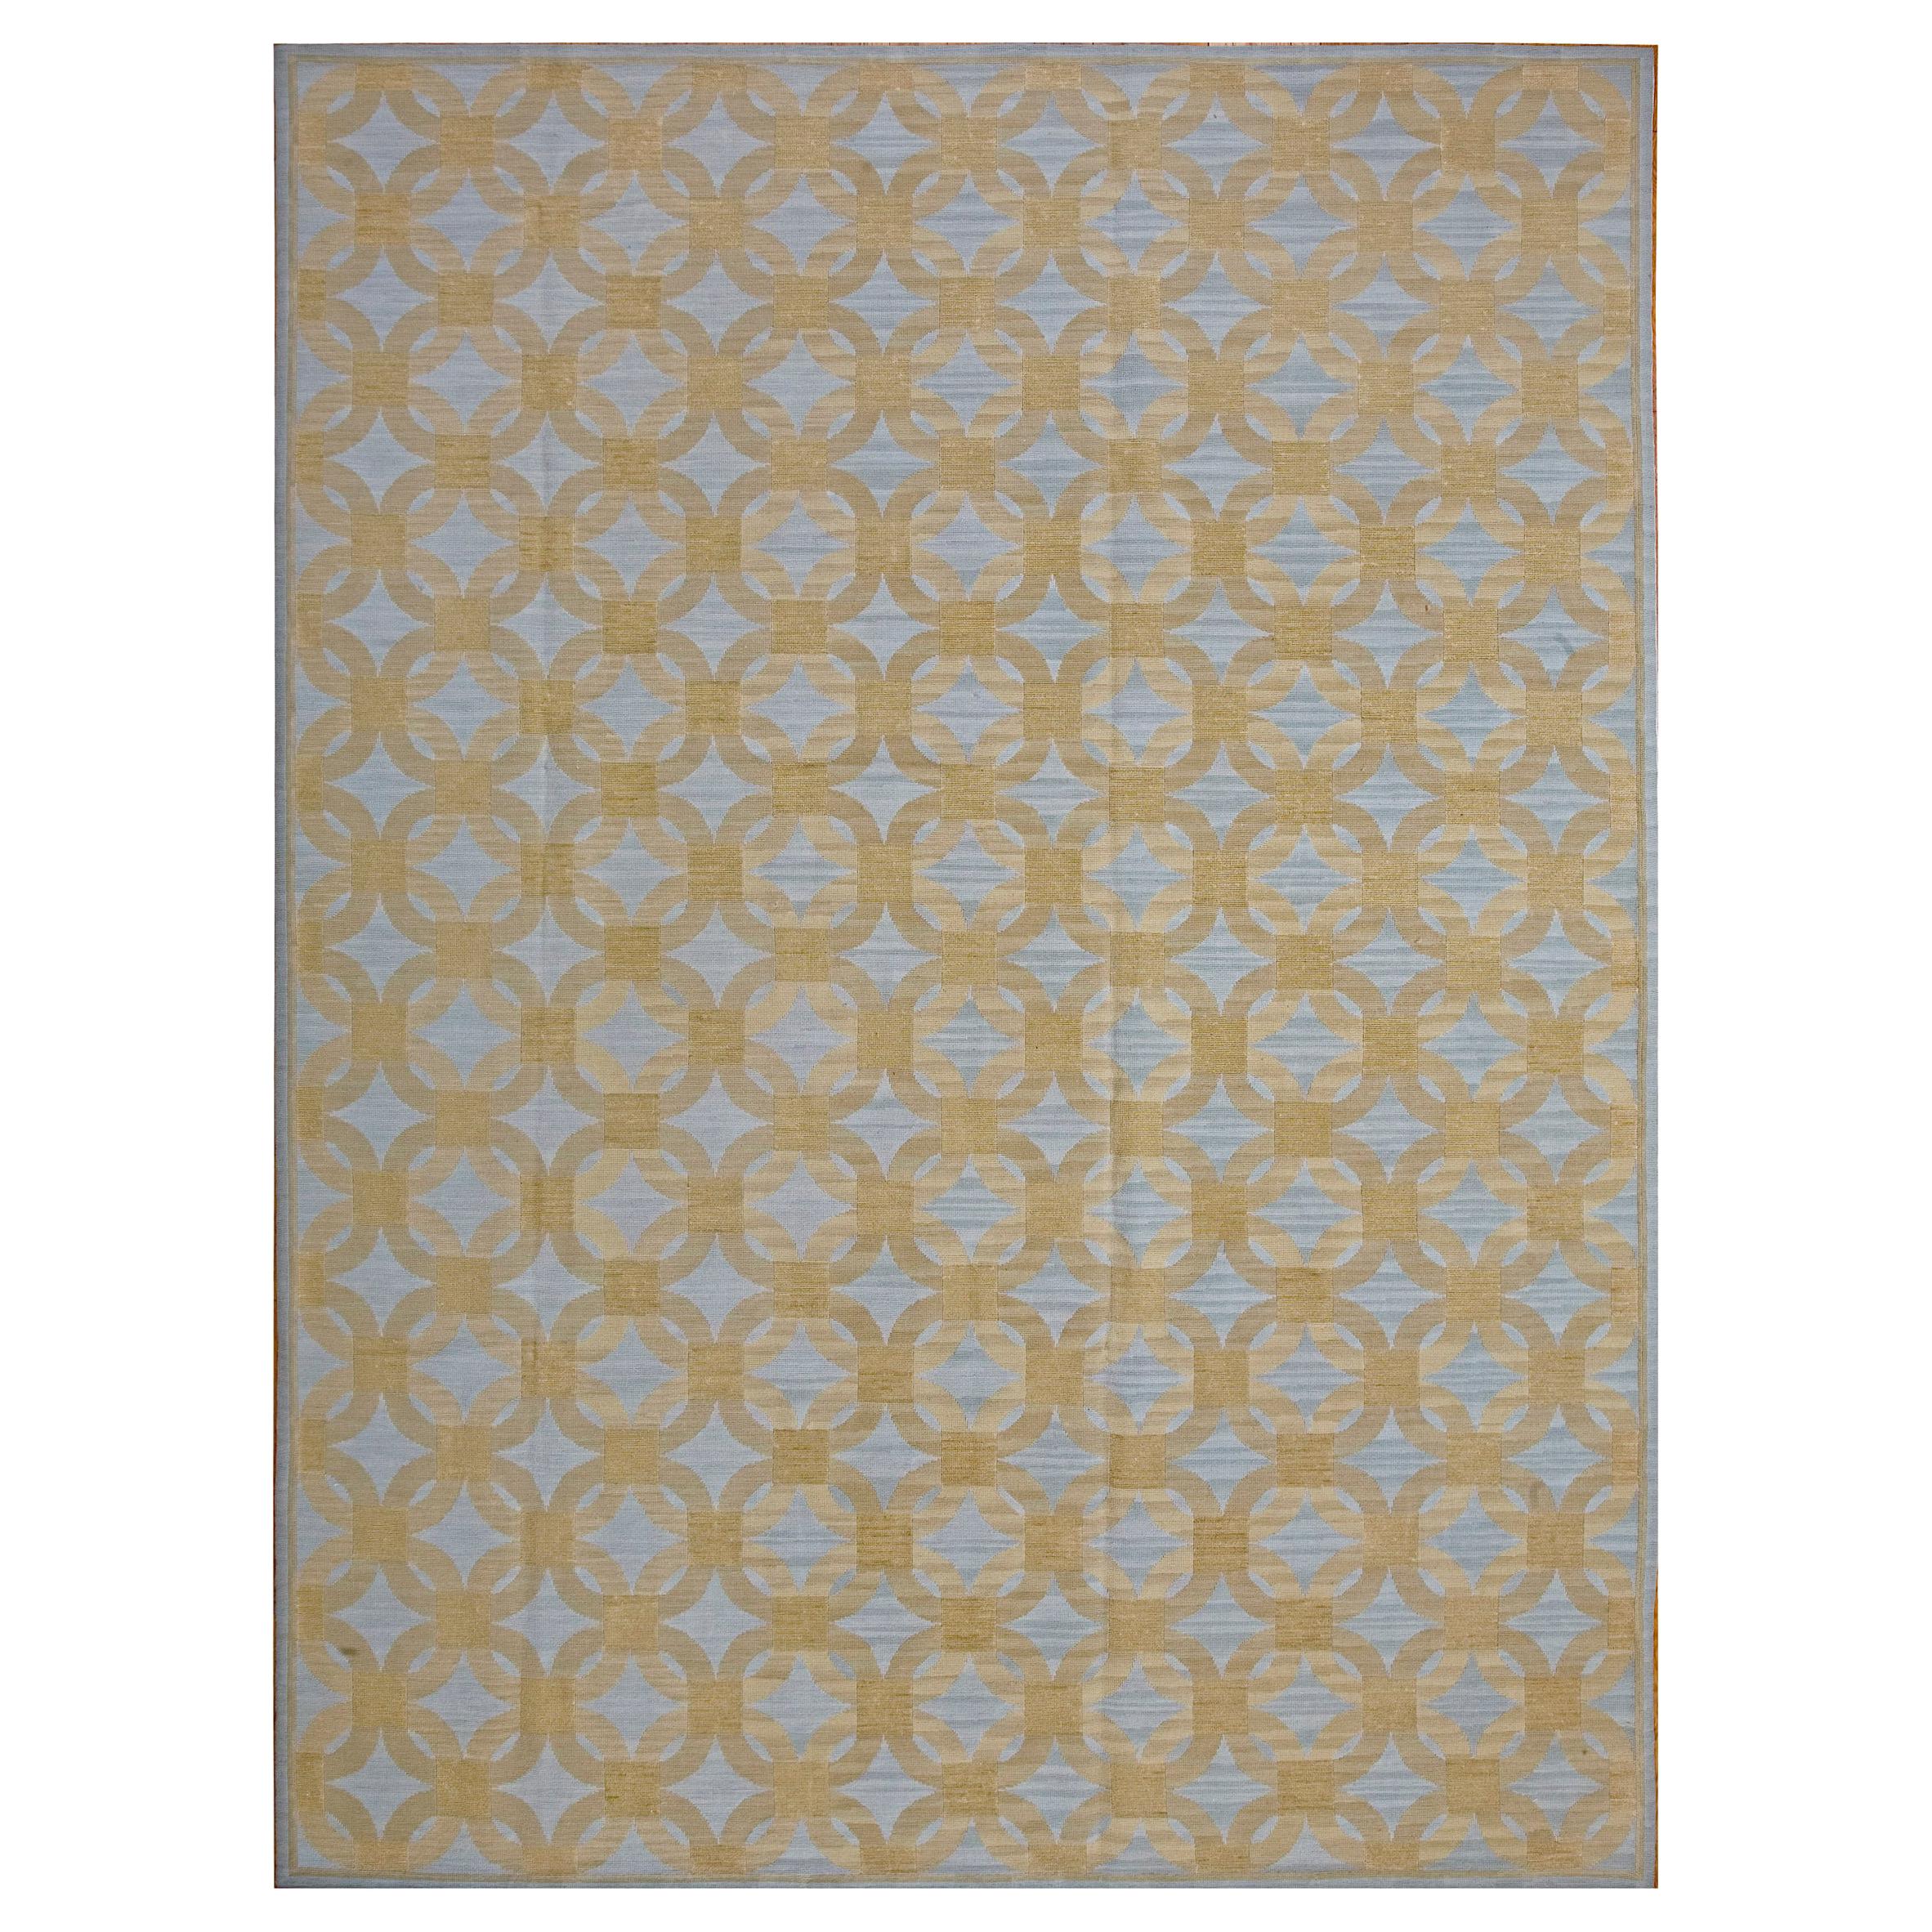 Contemporaneity Handwoven Wool Needlepoint Flat Weave Carpet With Silk Highlight For Sale